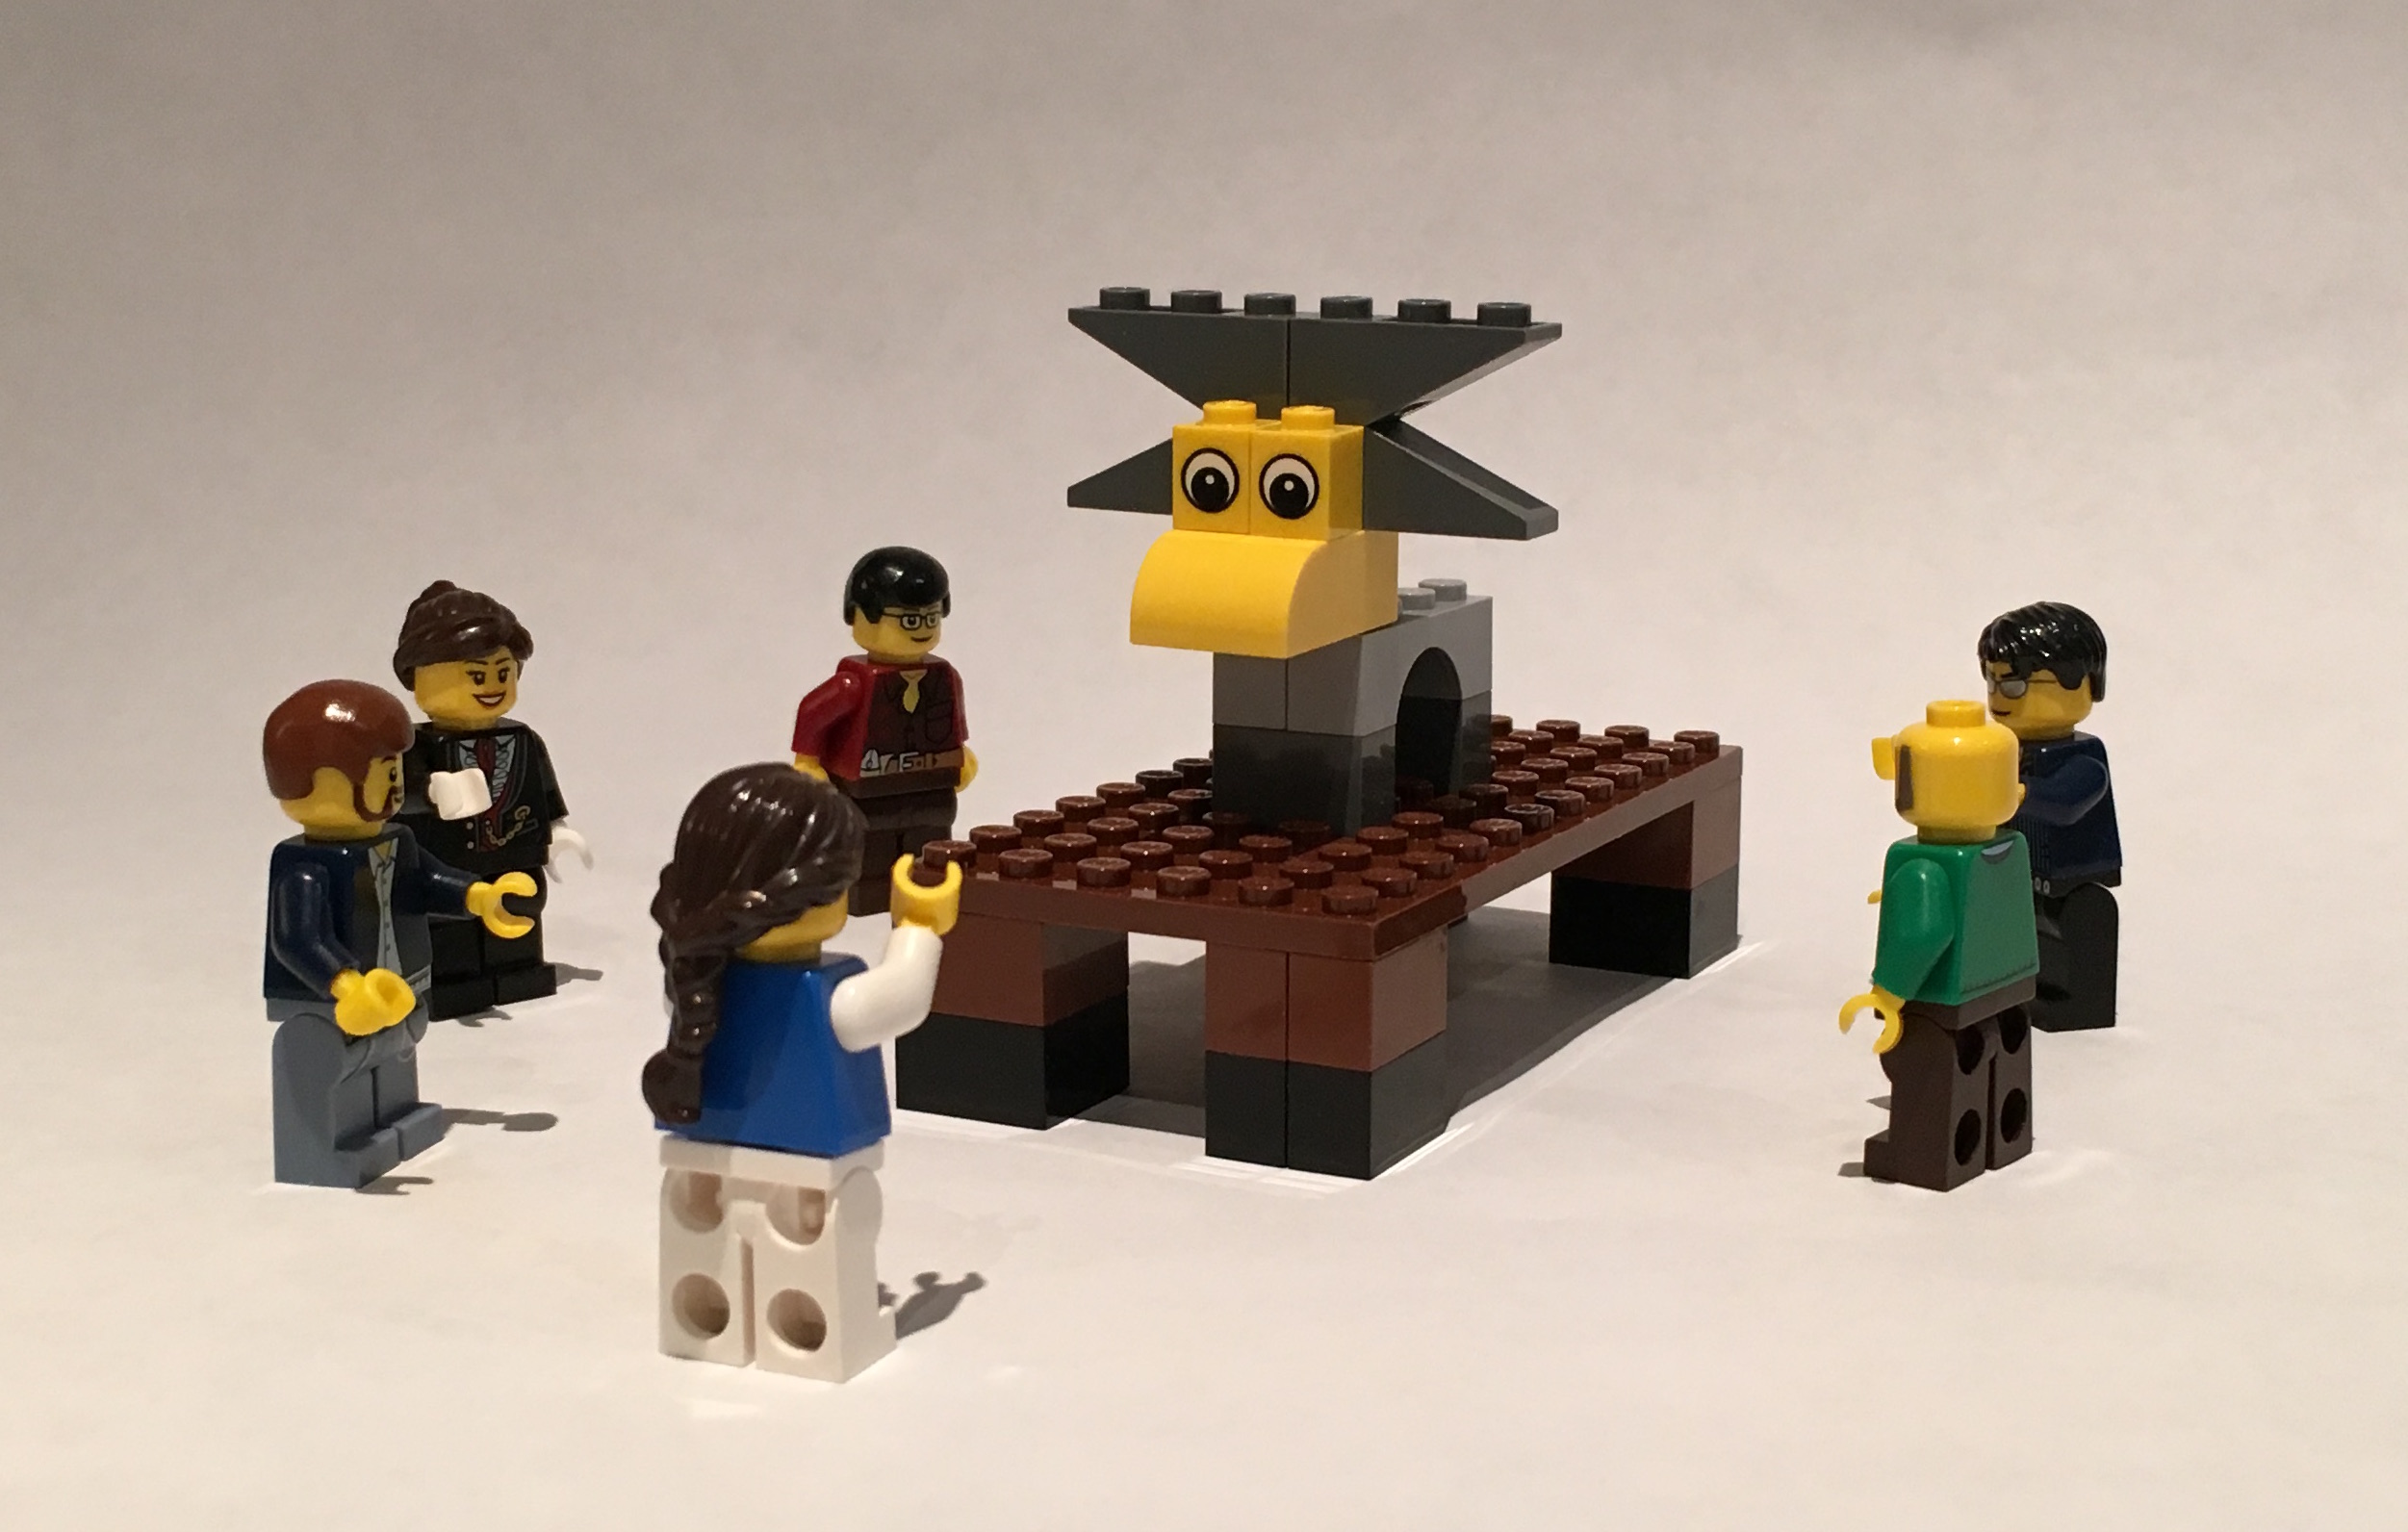 A LEGO model of a moose with people standing around it.